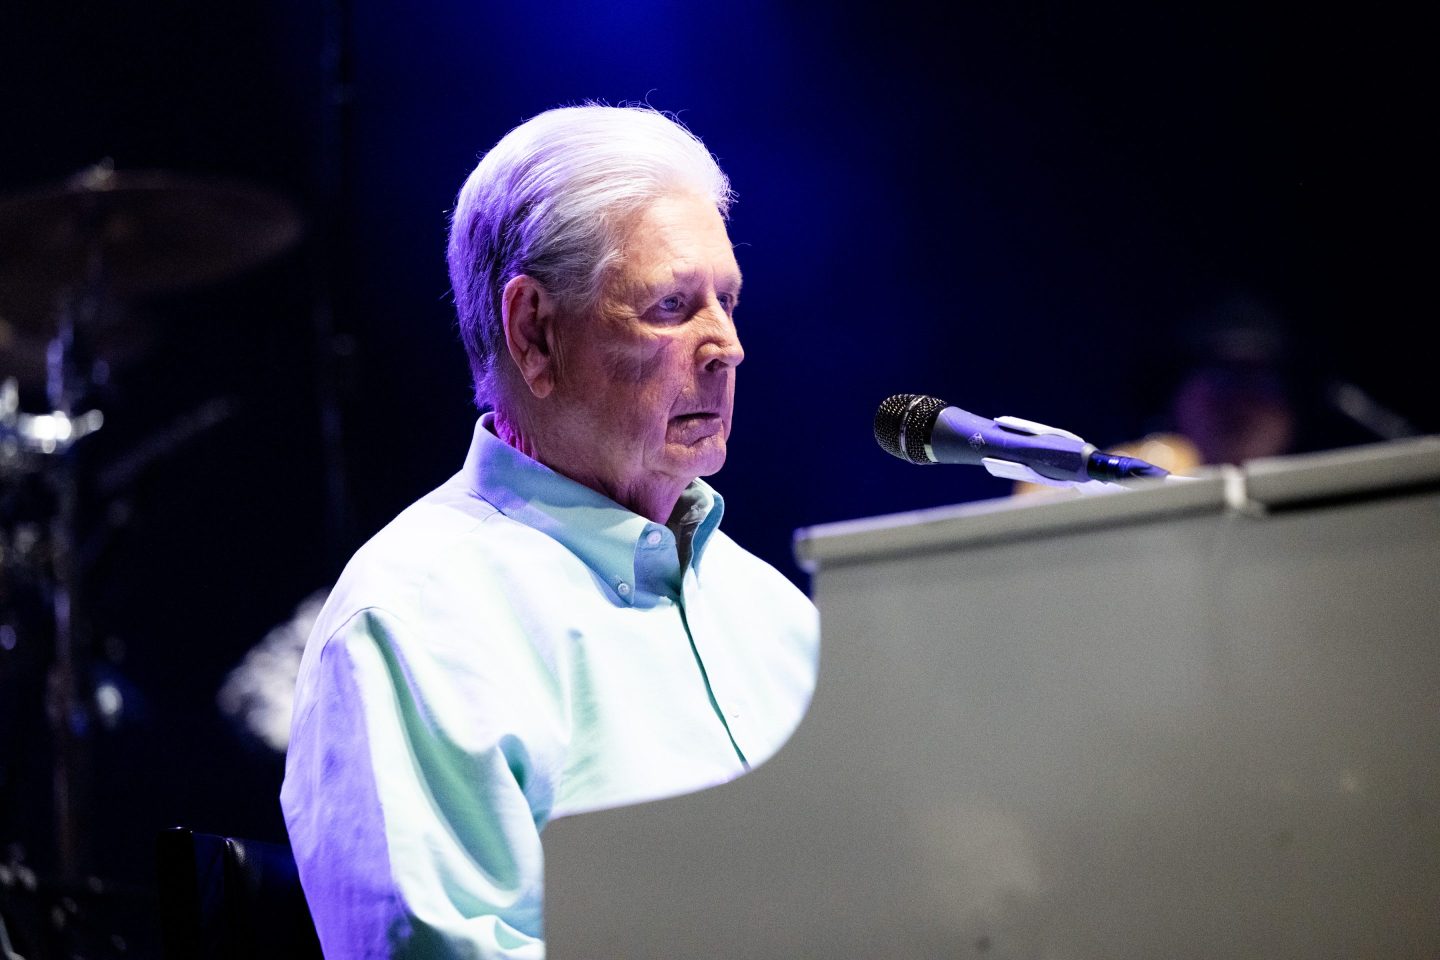 INGLEWOOD, CALIFORNIA &#8211; JUNE 09:  Musician Brian Wilson, founding member of The Beach Boys, performs onstage at The Kia Forum on June 09, 2022 in Inglewood, California. (Photo by Scott Dudelson/Getty Images)